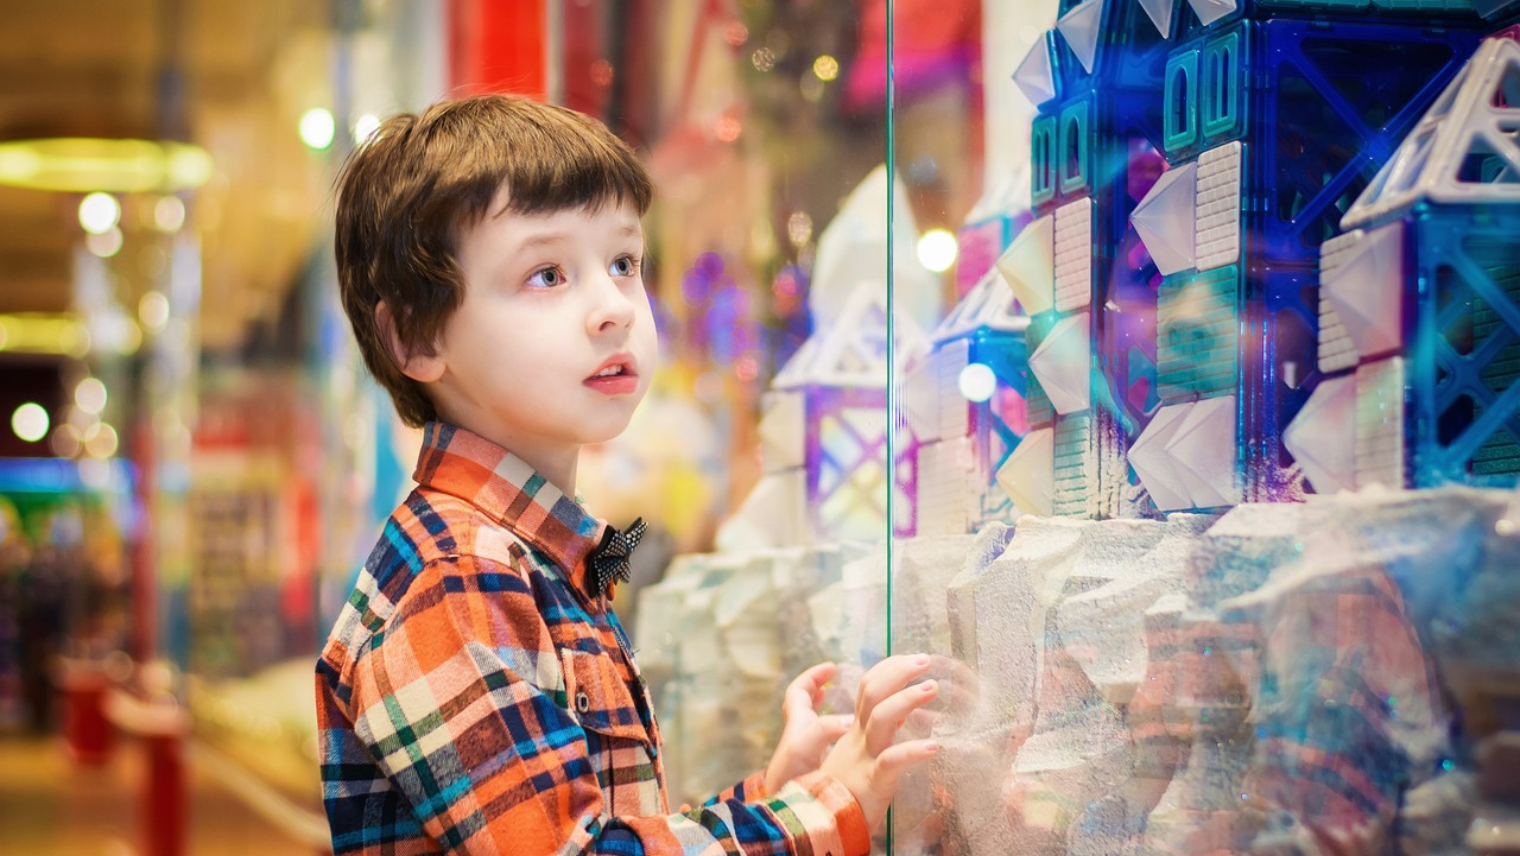 Child looking at a shop window